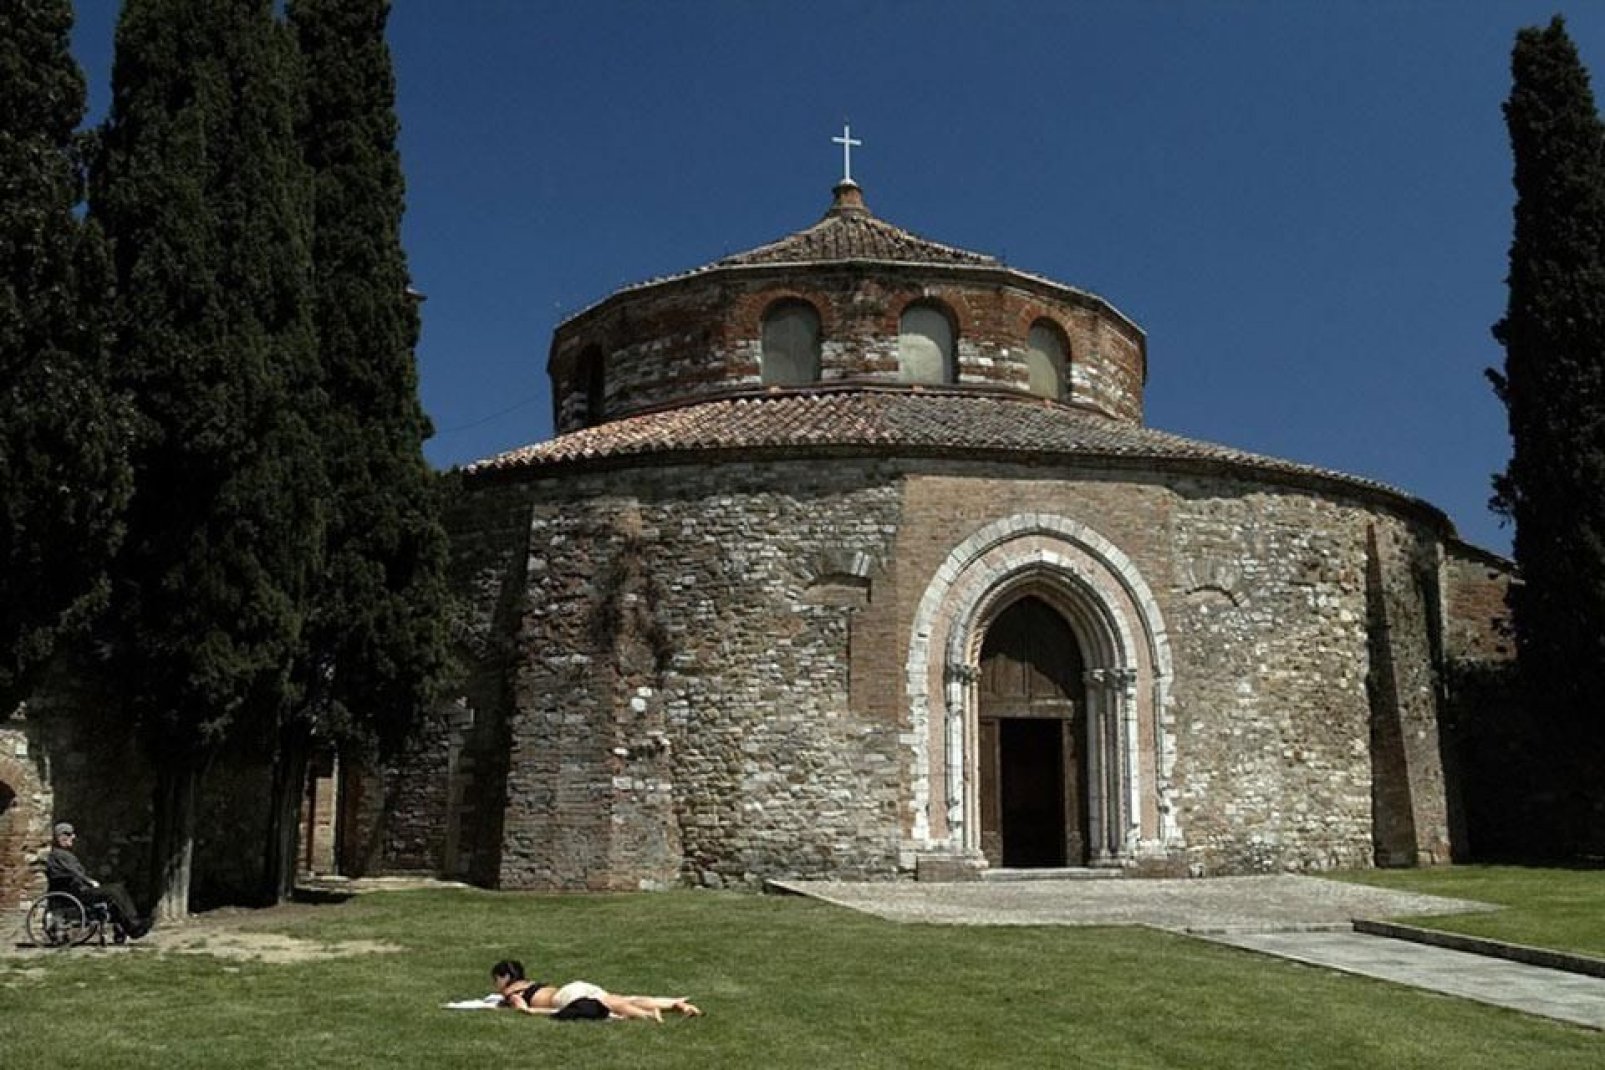 The Temple of Sant'Angelo is a Paleochristian church dating back to the 5th century that constitutes a rare example of a circular plan church.